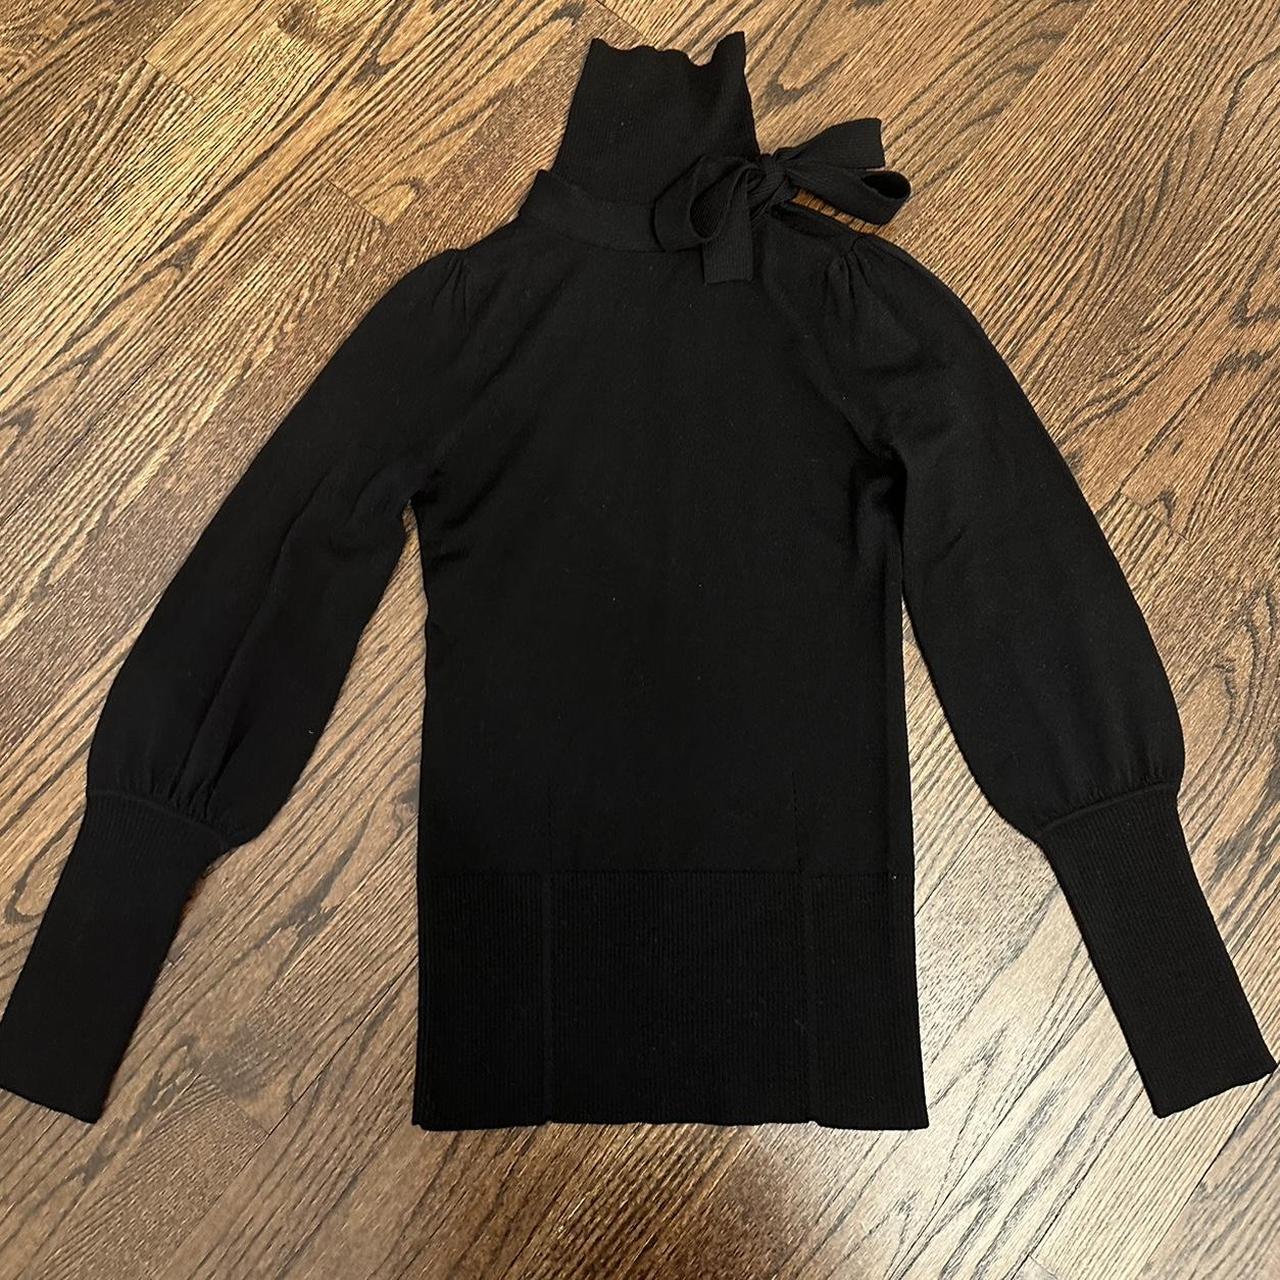 item listed by el0nclothes